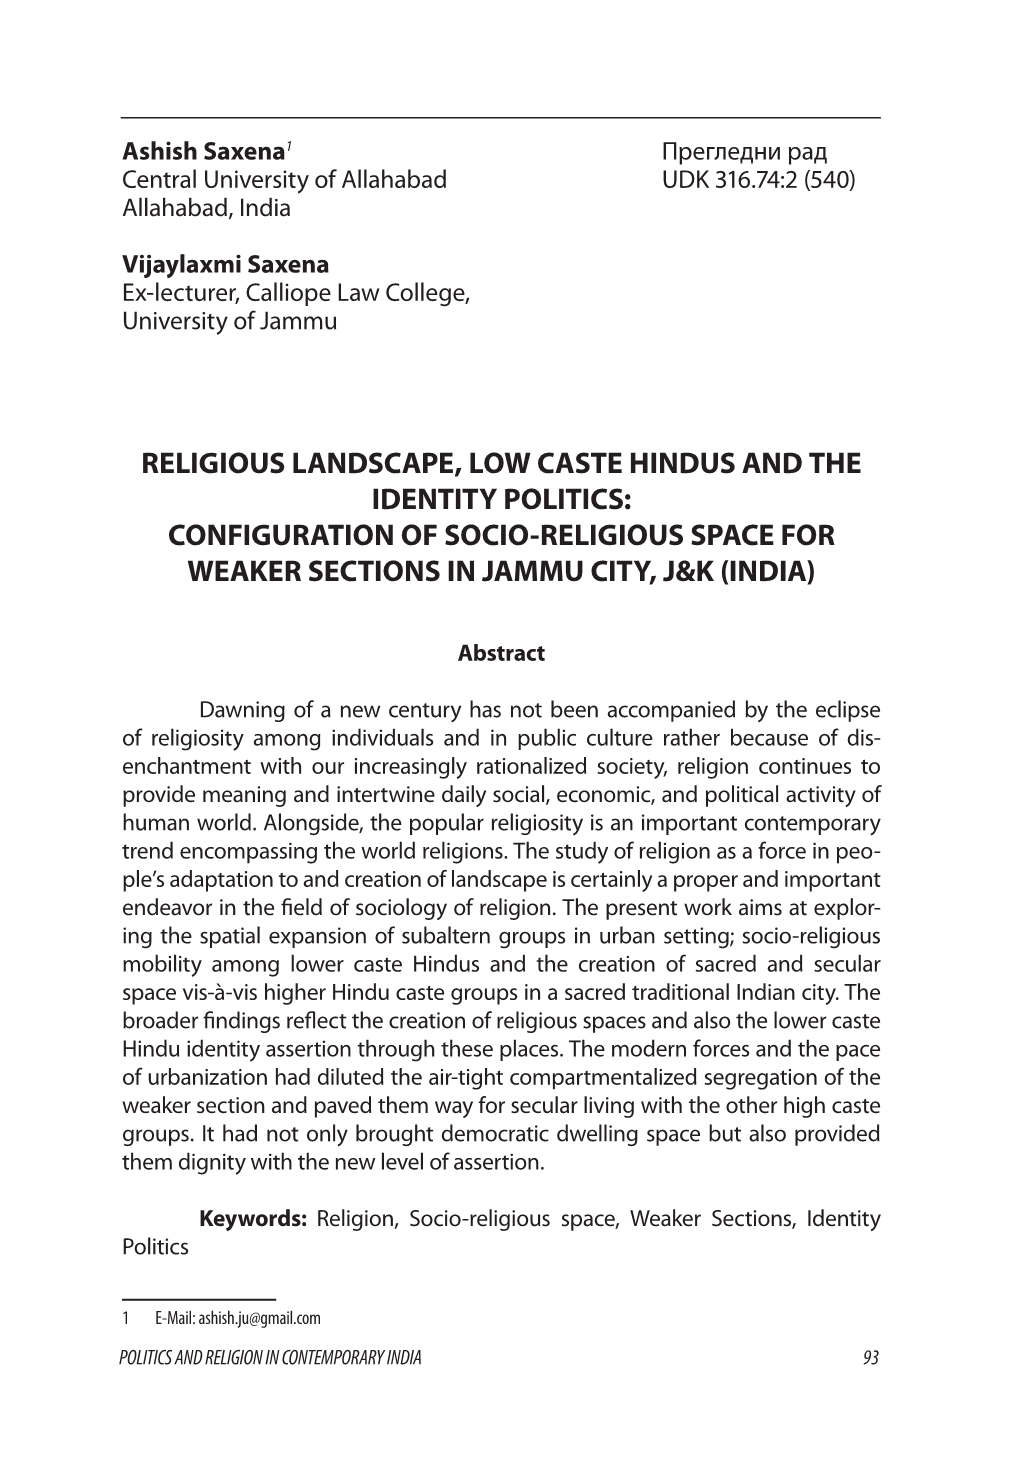 Religious Landscape, Low Caste Hindus and the Identity Politics: Configuration of Socio-Religious Space for Weaker Sections in Jammu City, J&K (India)